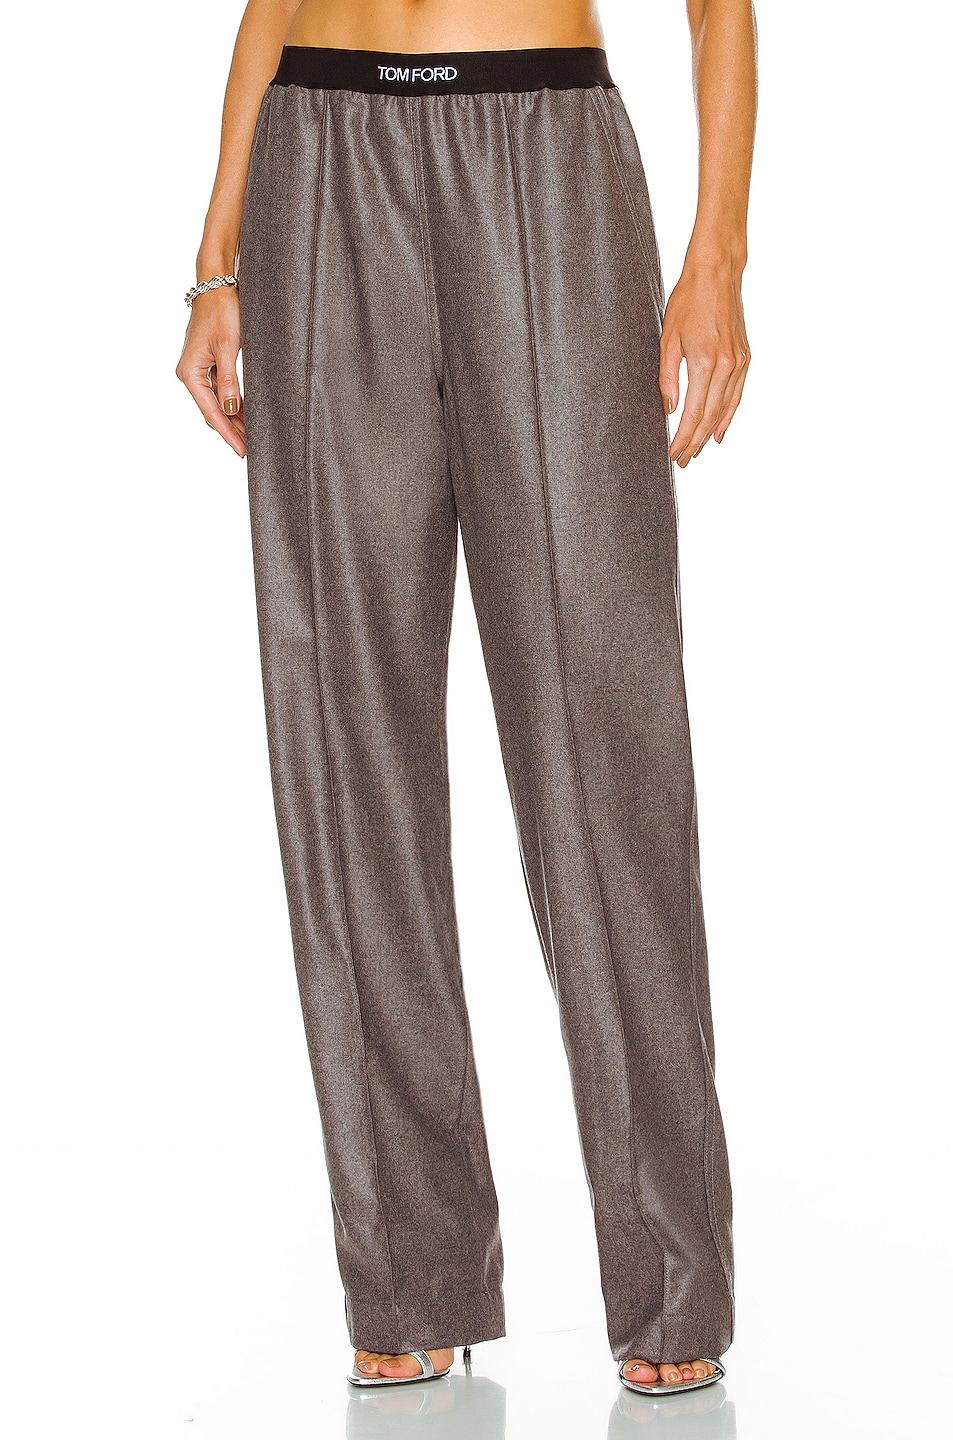 Image 1 of TOM FORD Cashmere Tailored PJ pant in Grey & White